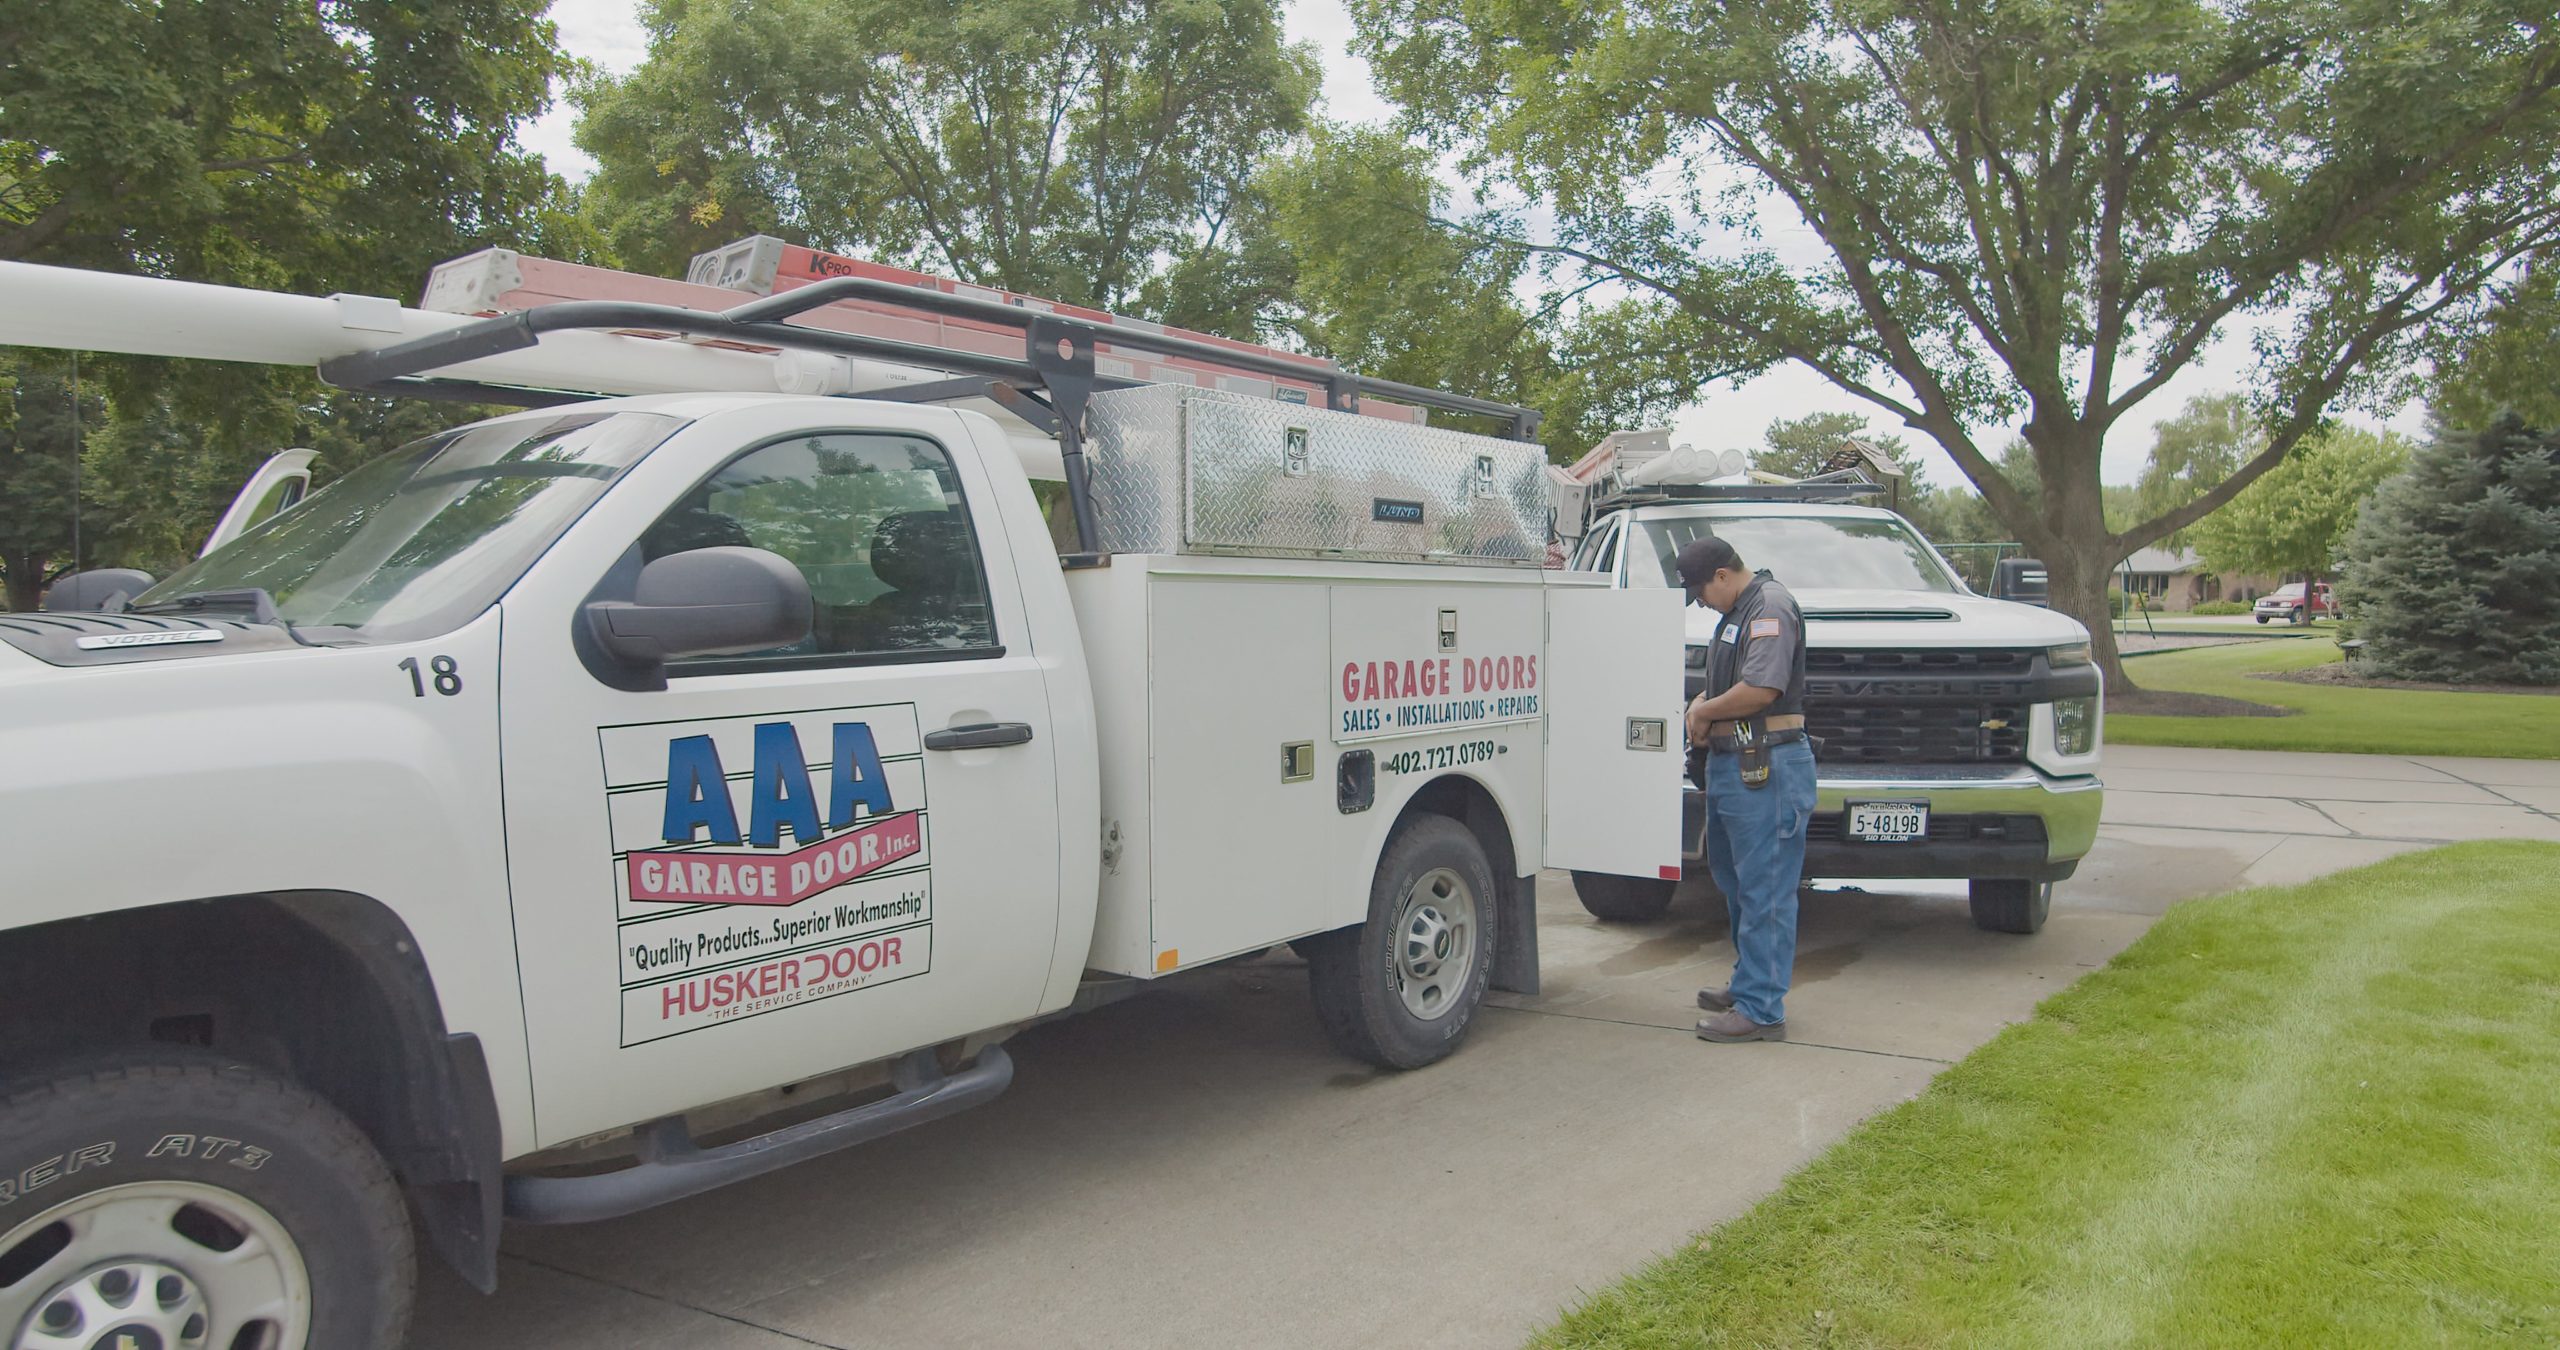 2 AAA Garage Door service trucks showing up at a customer's house to provide garage services